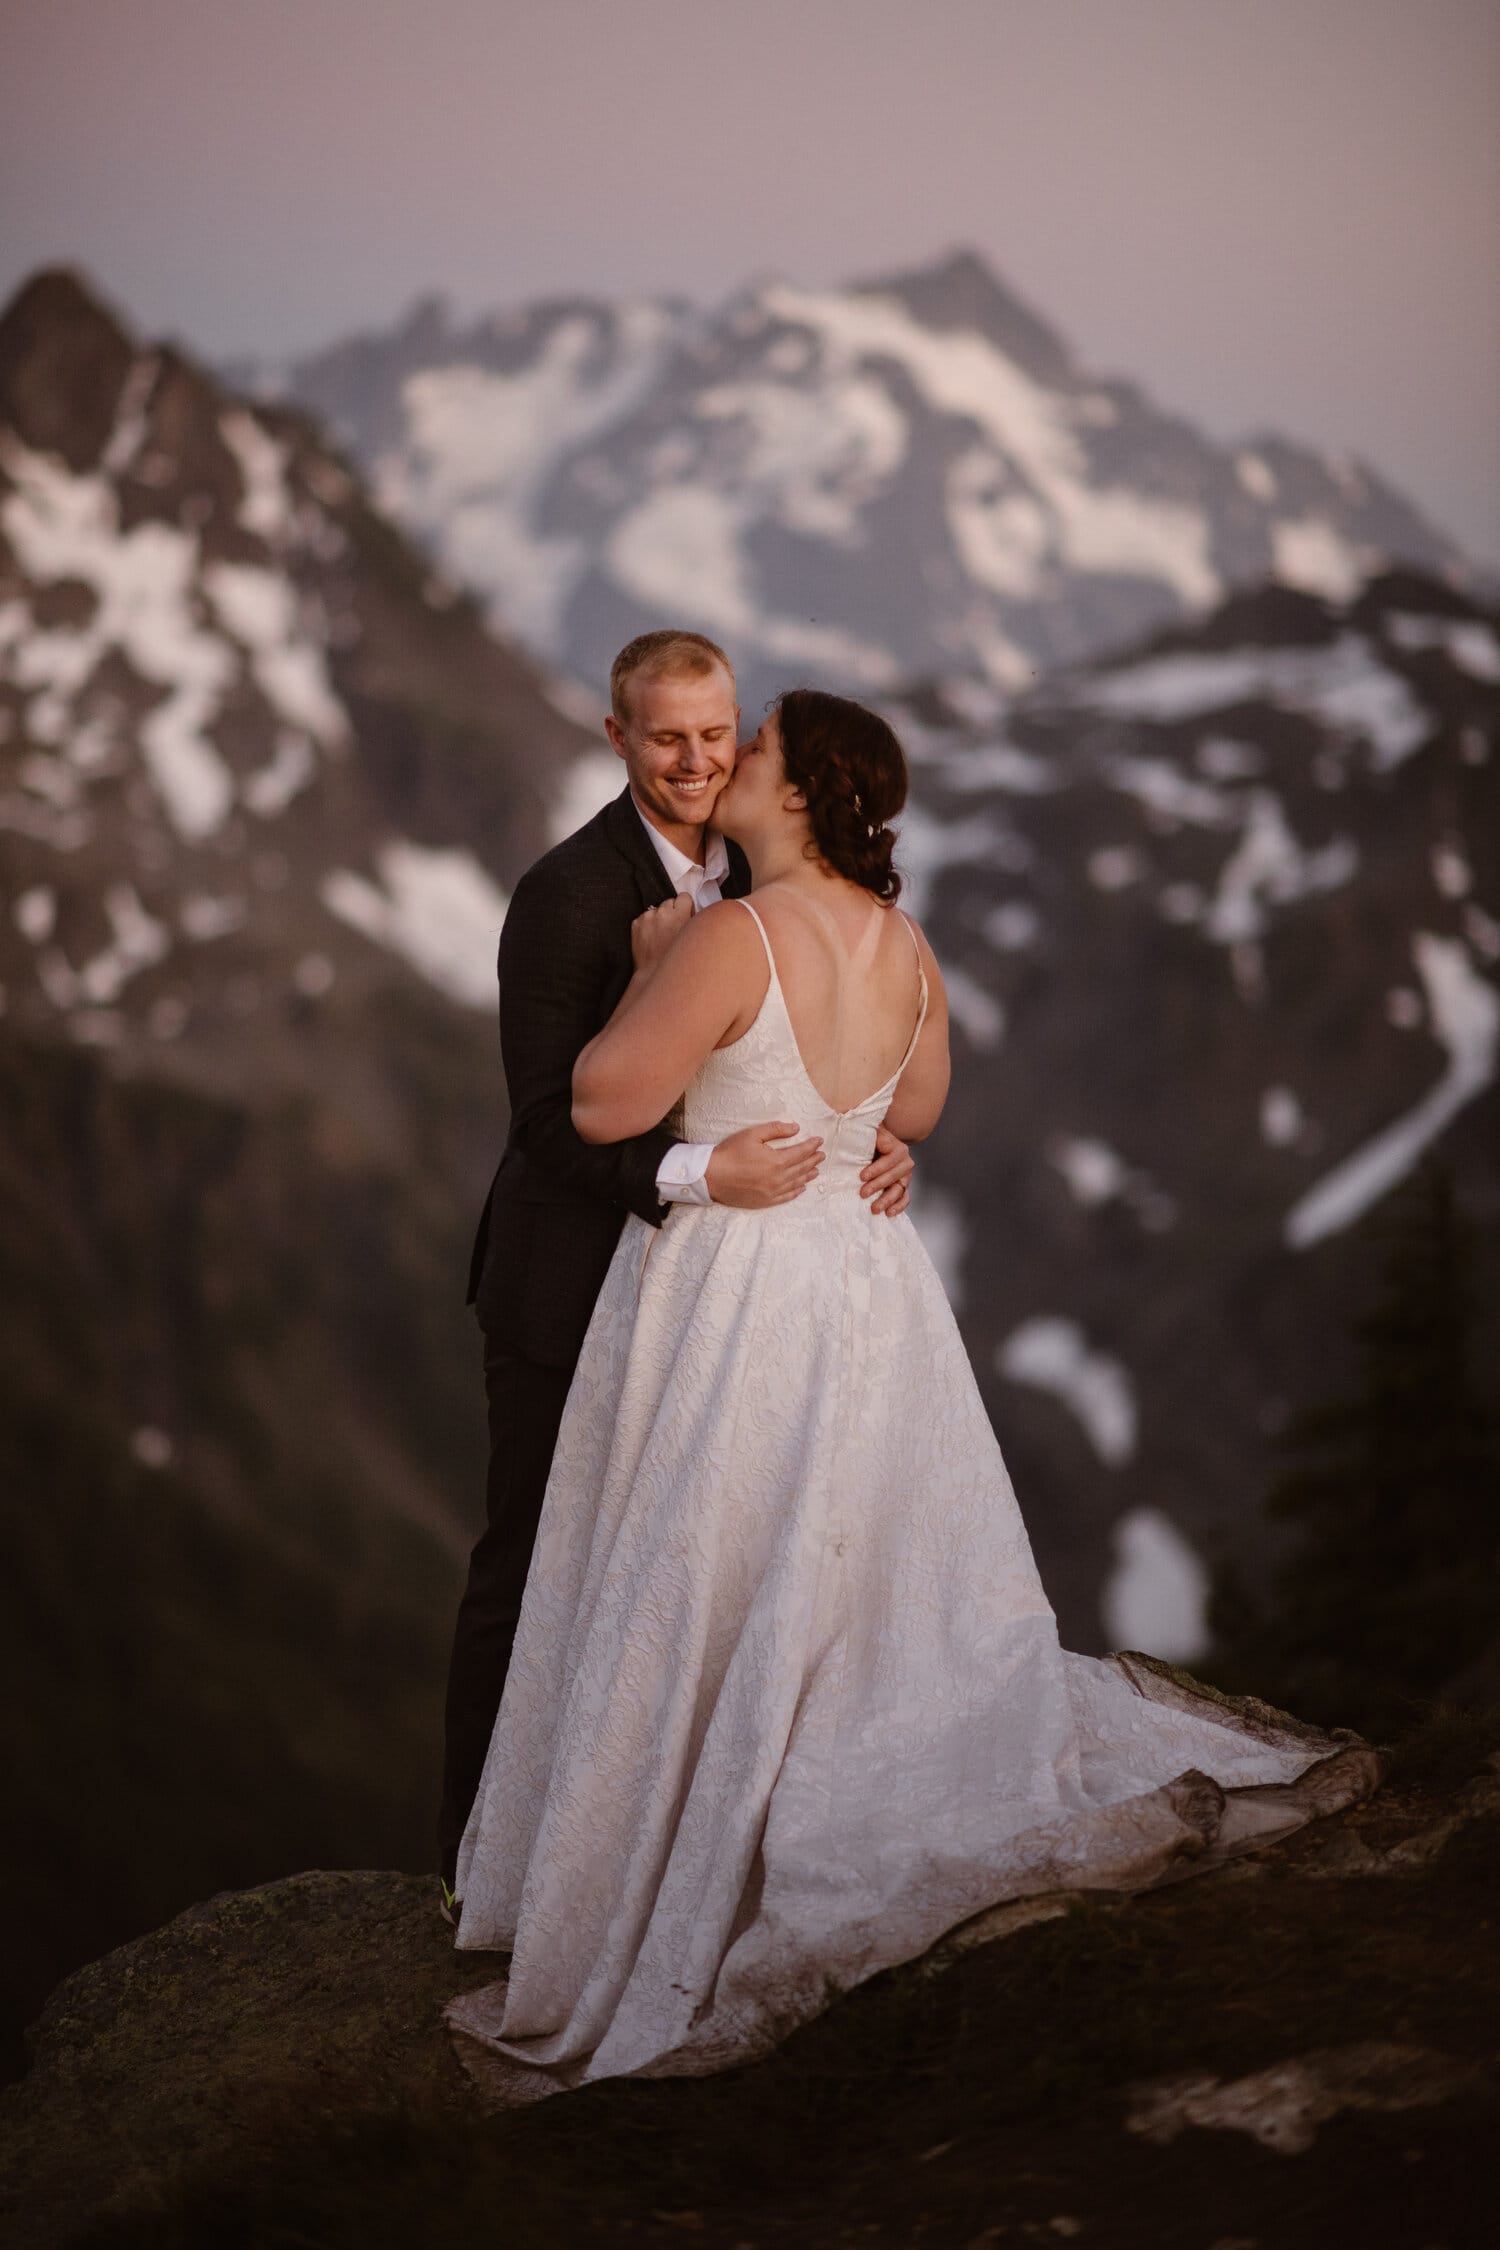 Bride kisses groom on the cheek on their elopement day in Washington. There are snow-capped mountains in the background. 